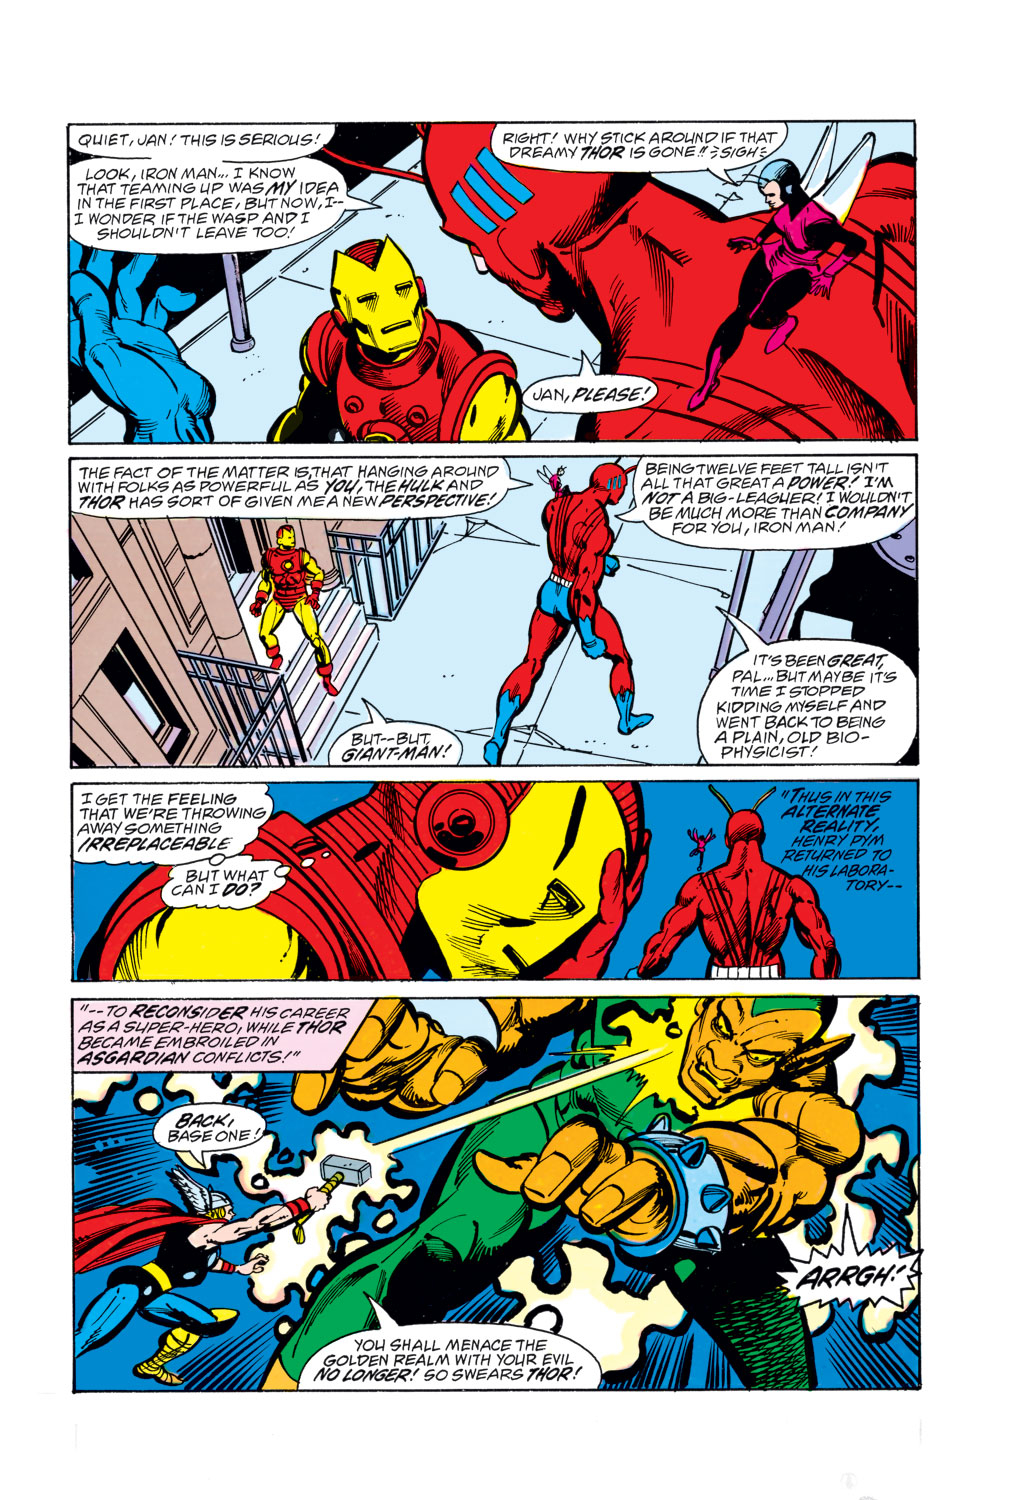 What If? (1977) issue 3 - The Avengers had never been - Page 6